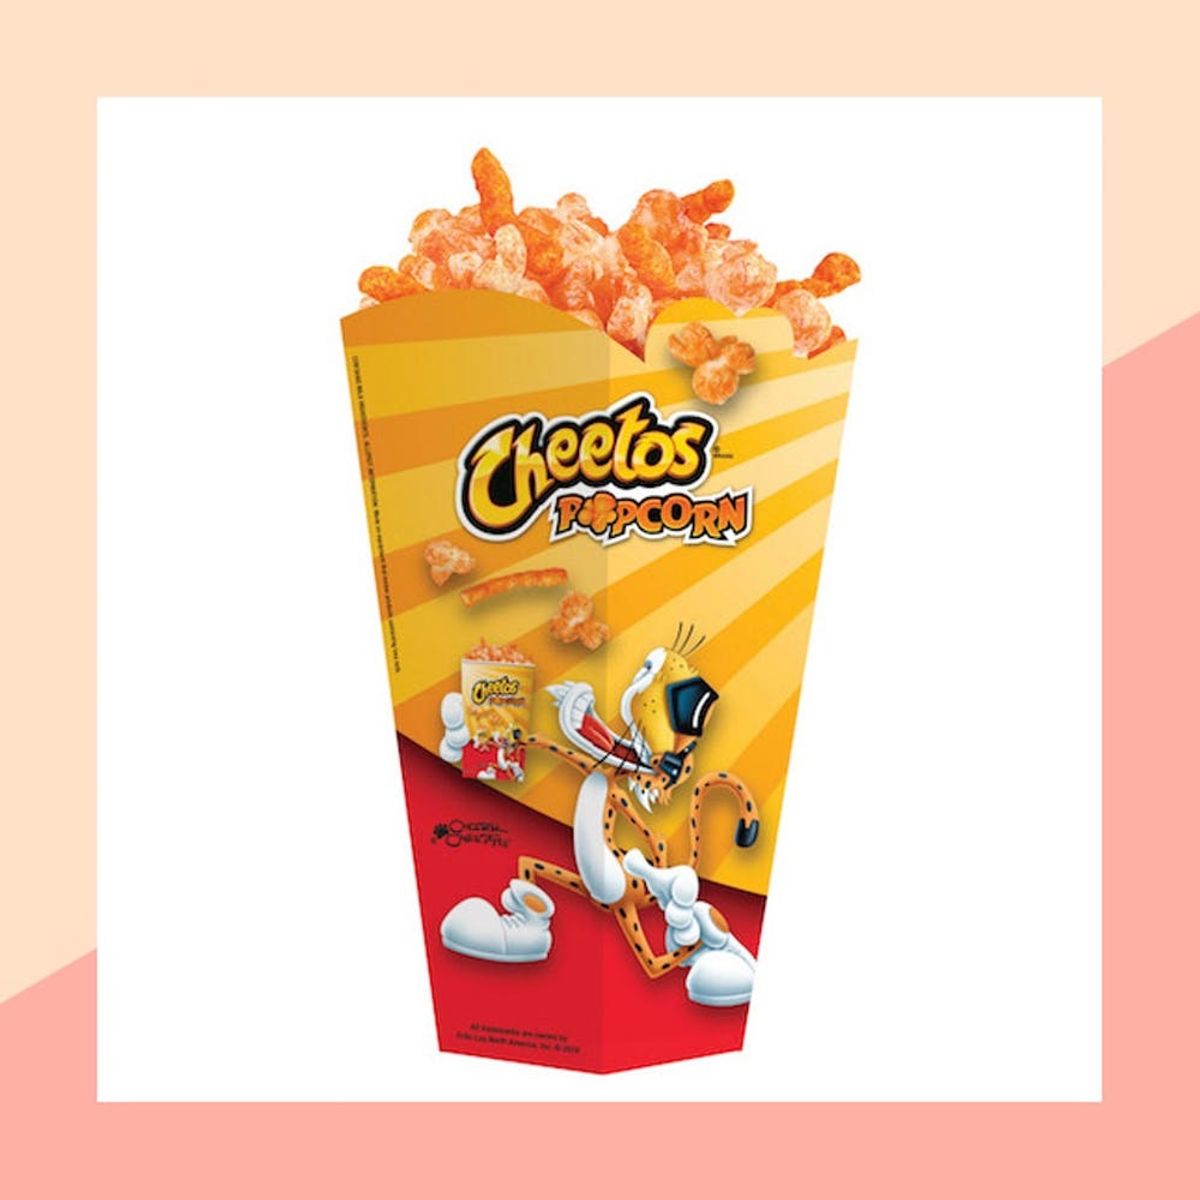 Cheetos Popcorn Now Exists, So Get Ready to Pig Out at the Movies